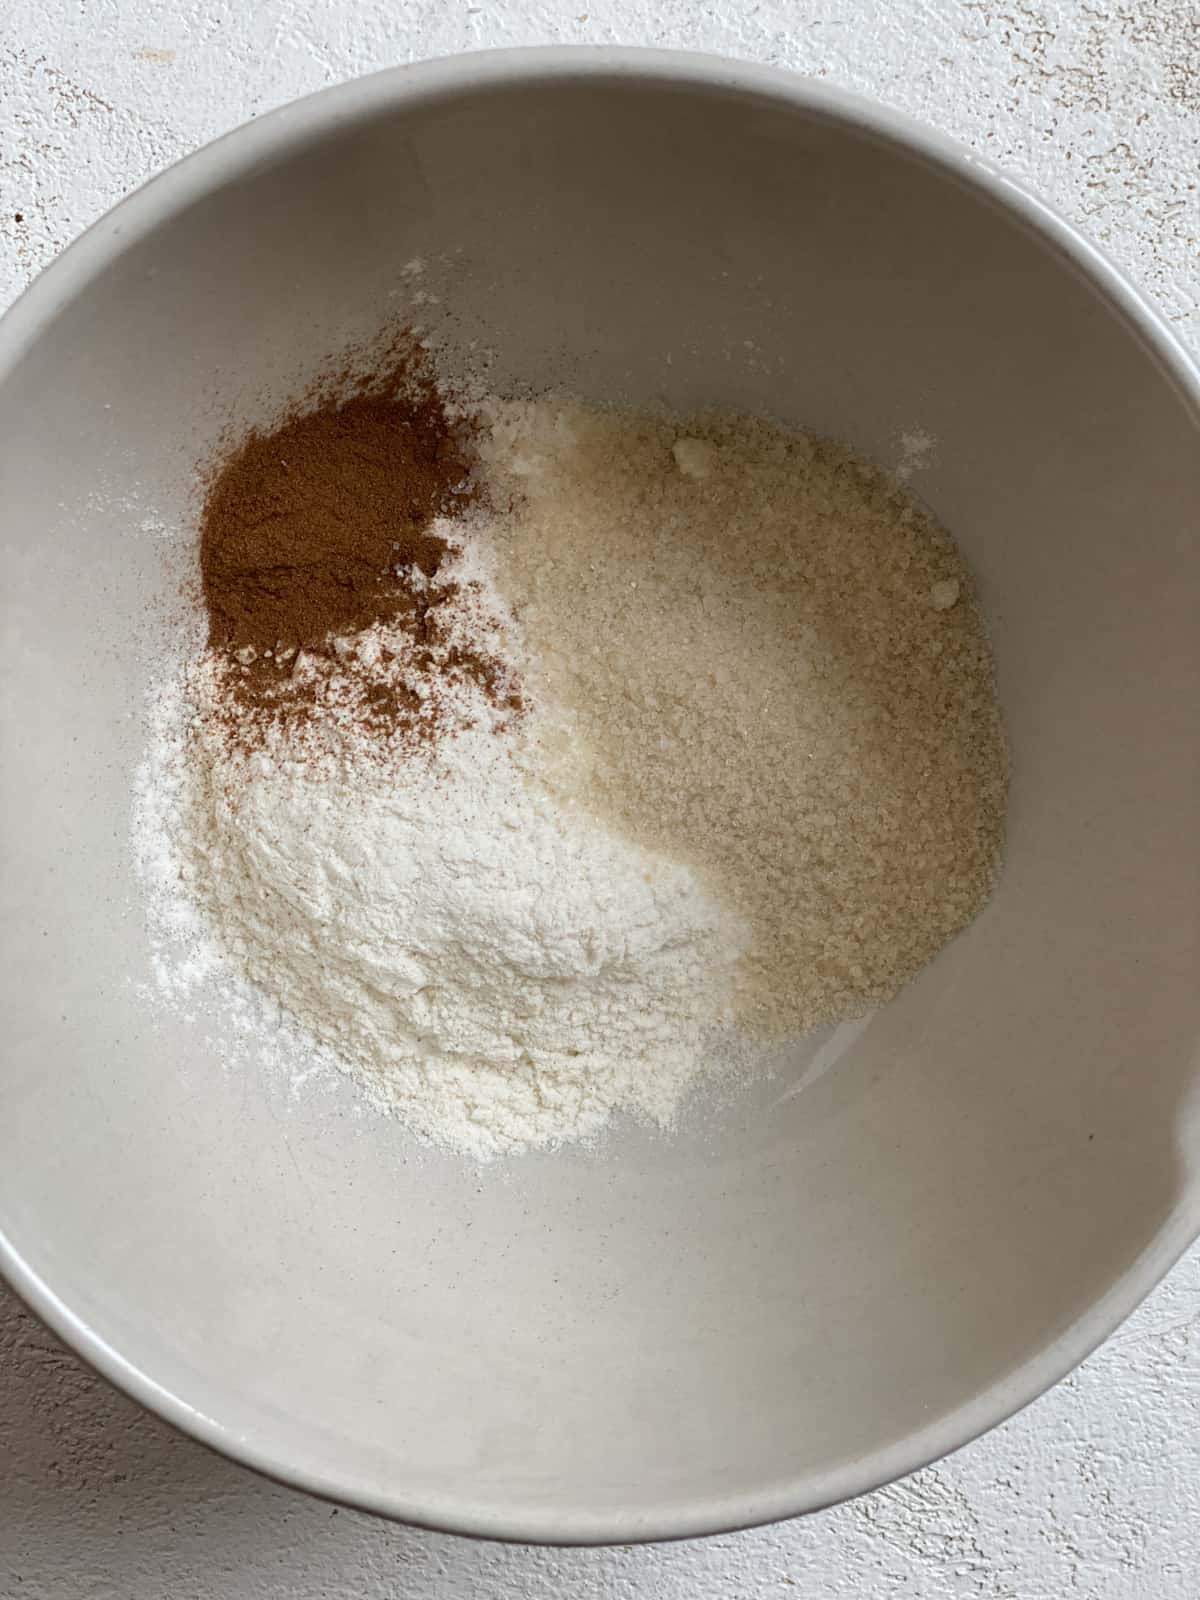 process s،t of ingredients added to bowl